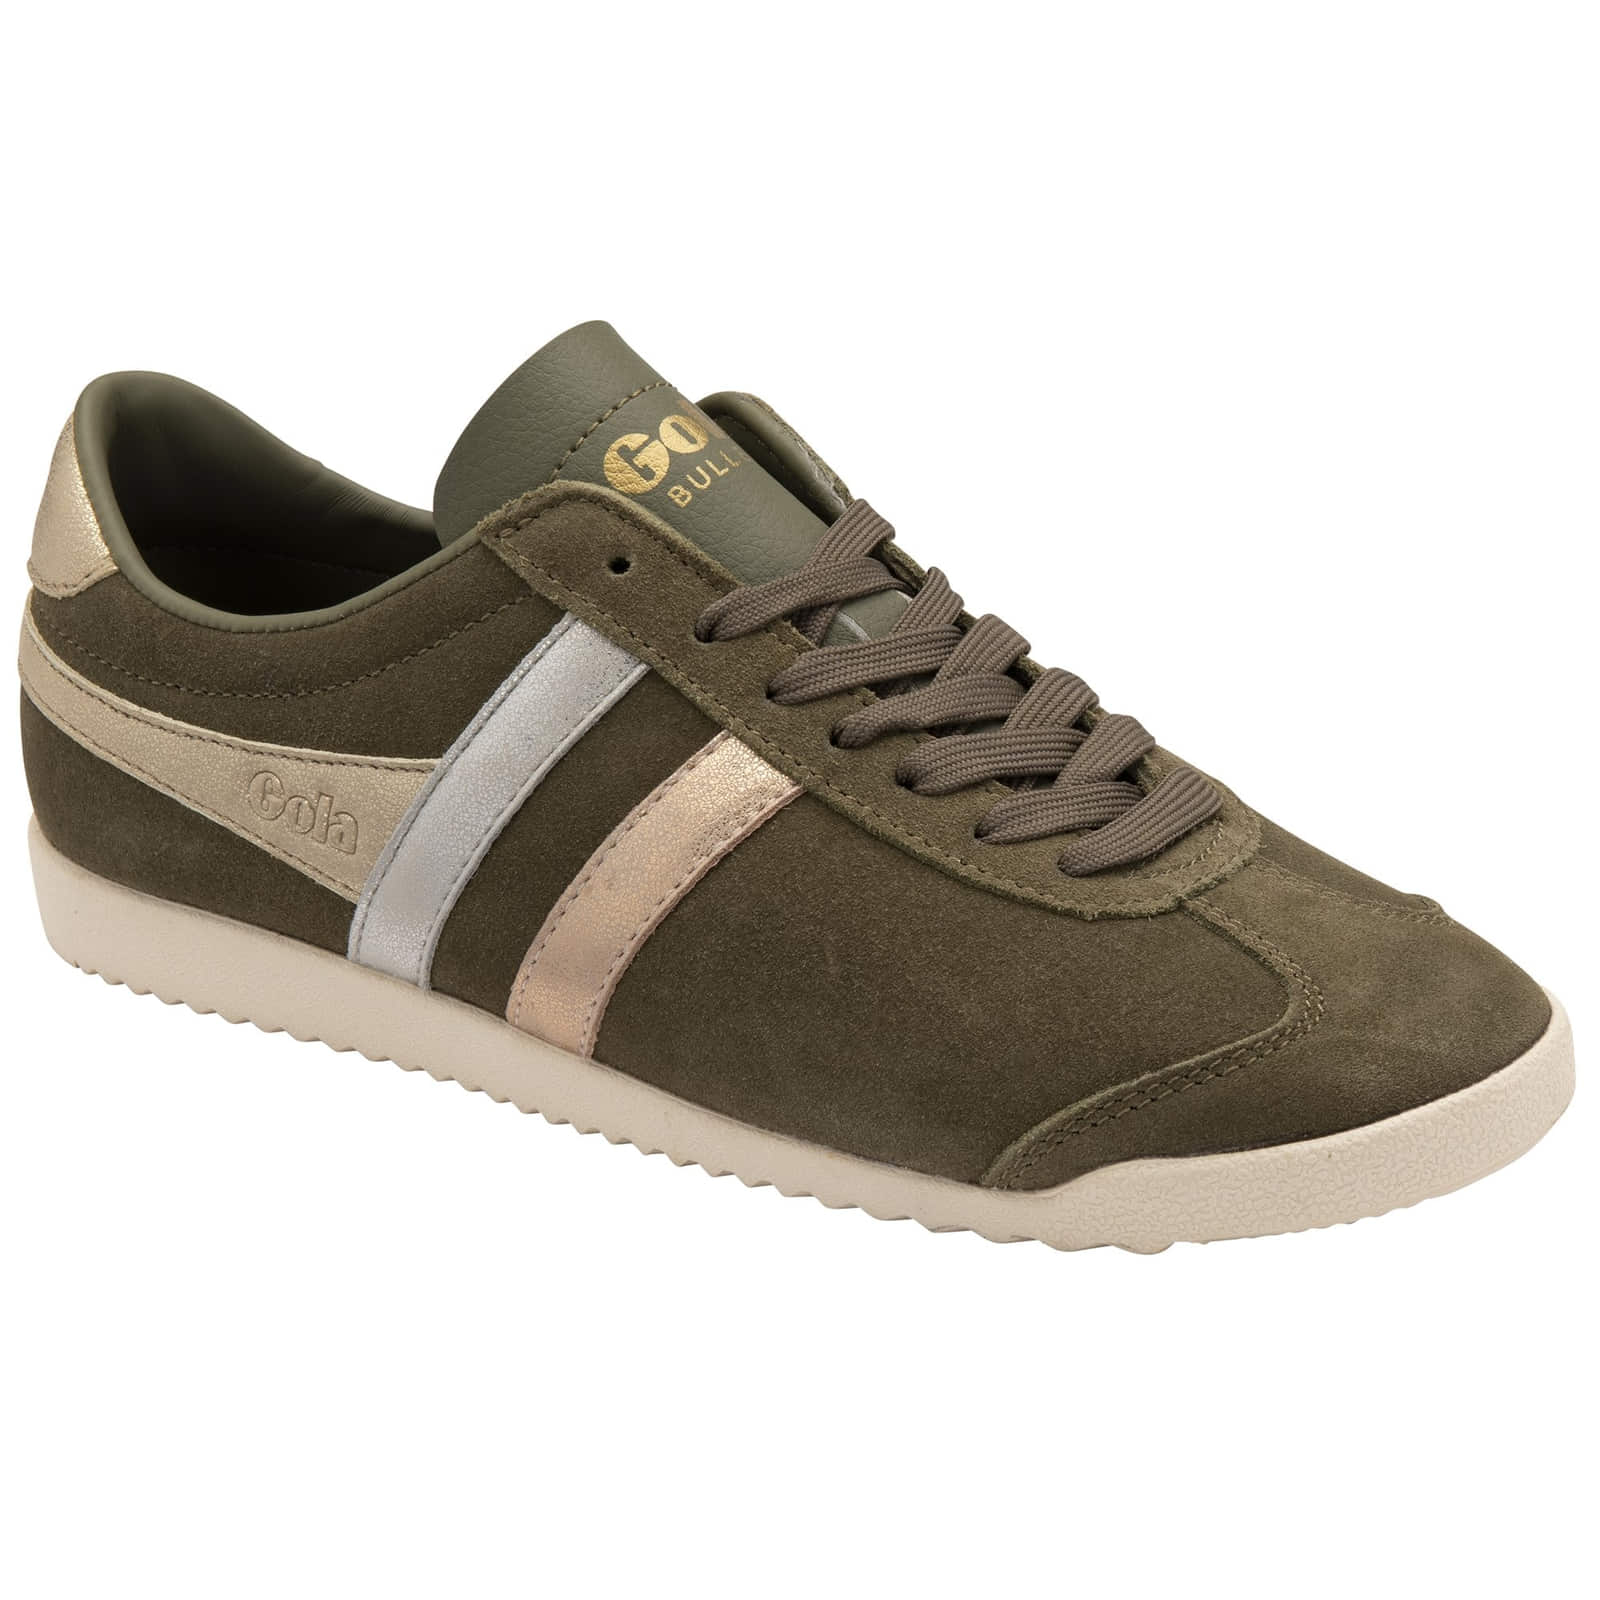 Gola Women's Bullet Mirror Trident Classic Trainers Shoes - UK 5